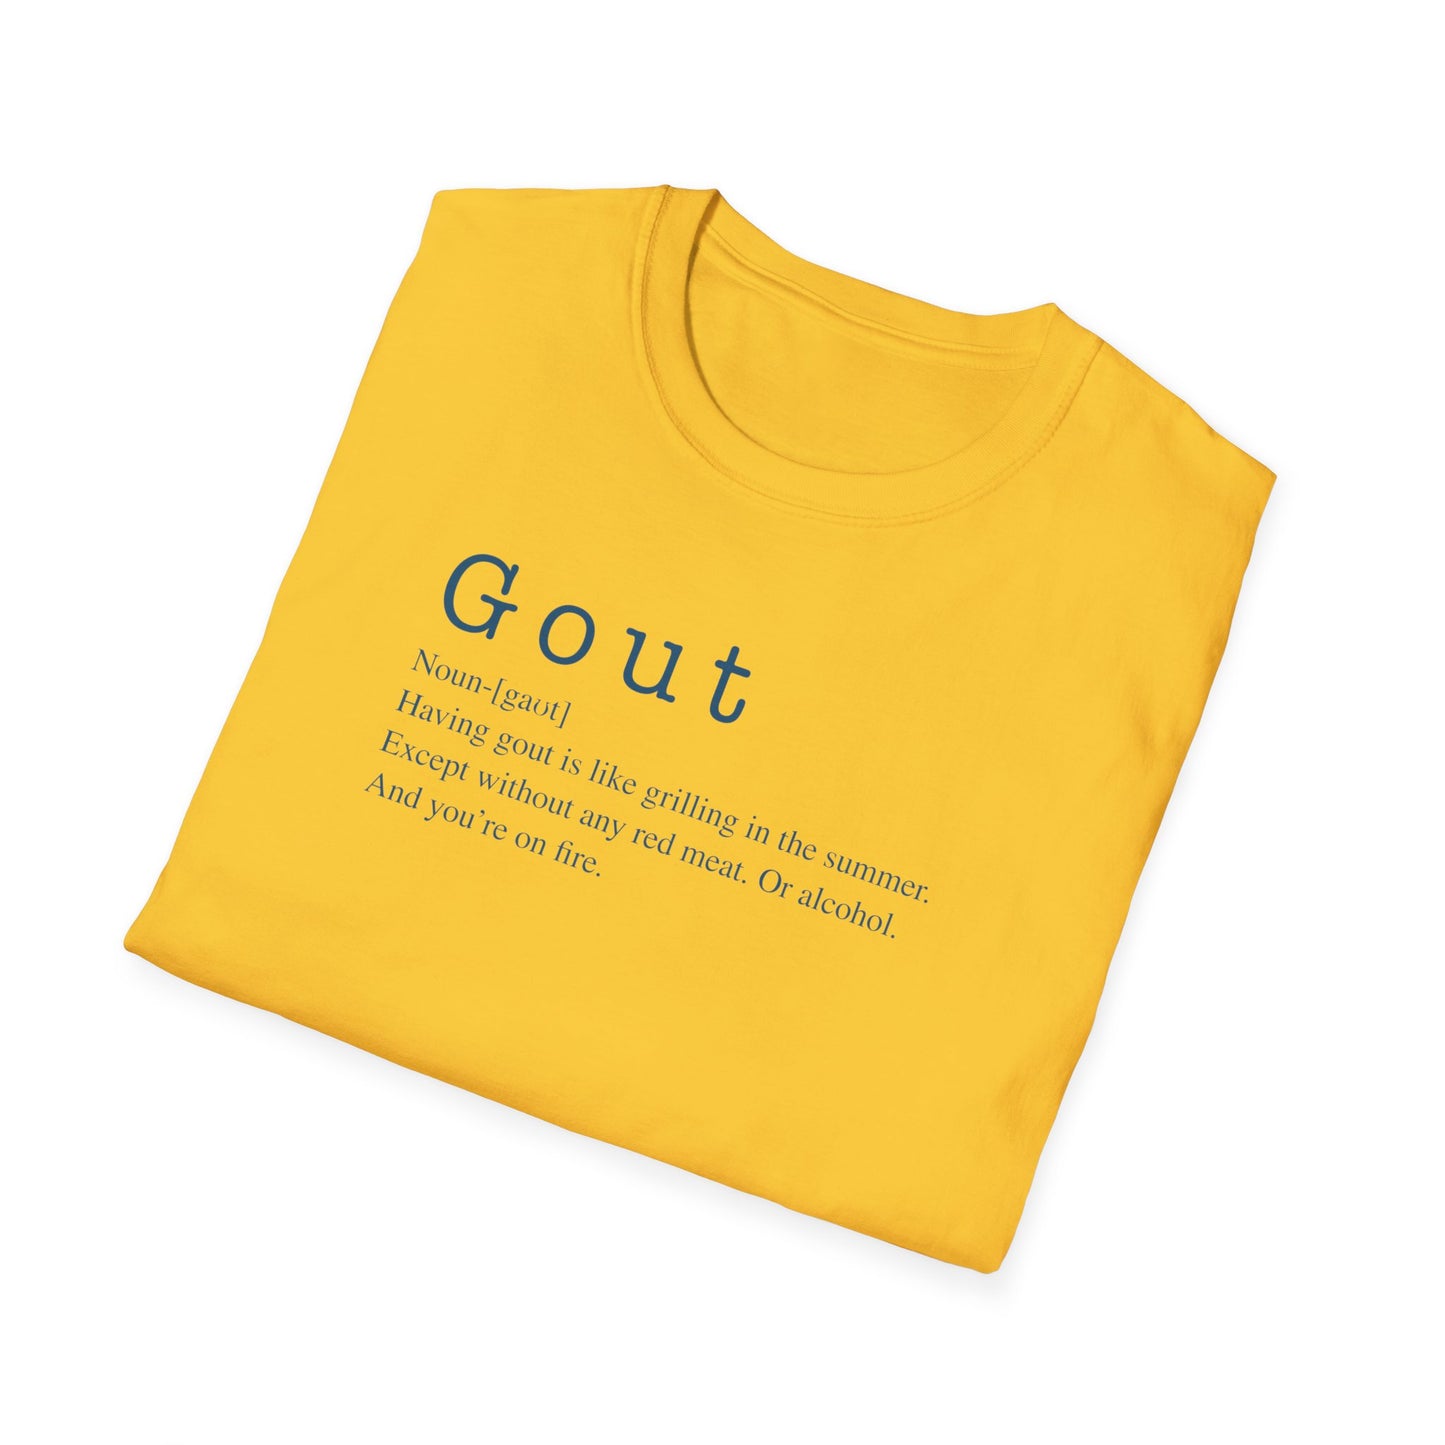 Gout is like...